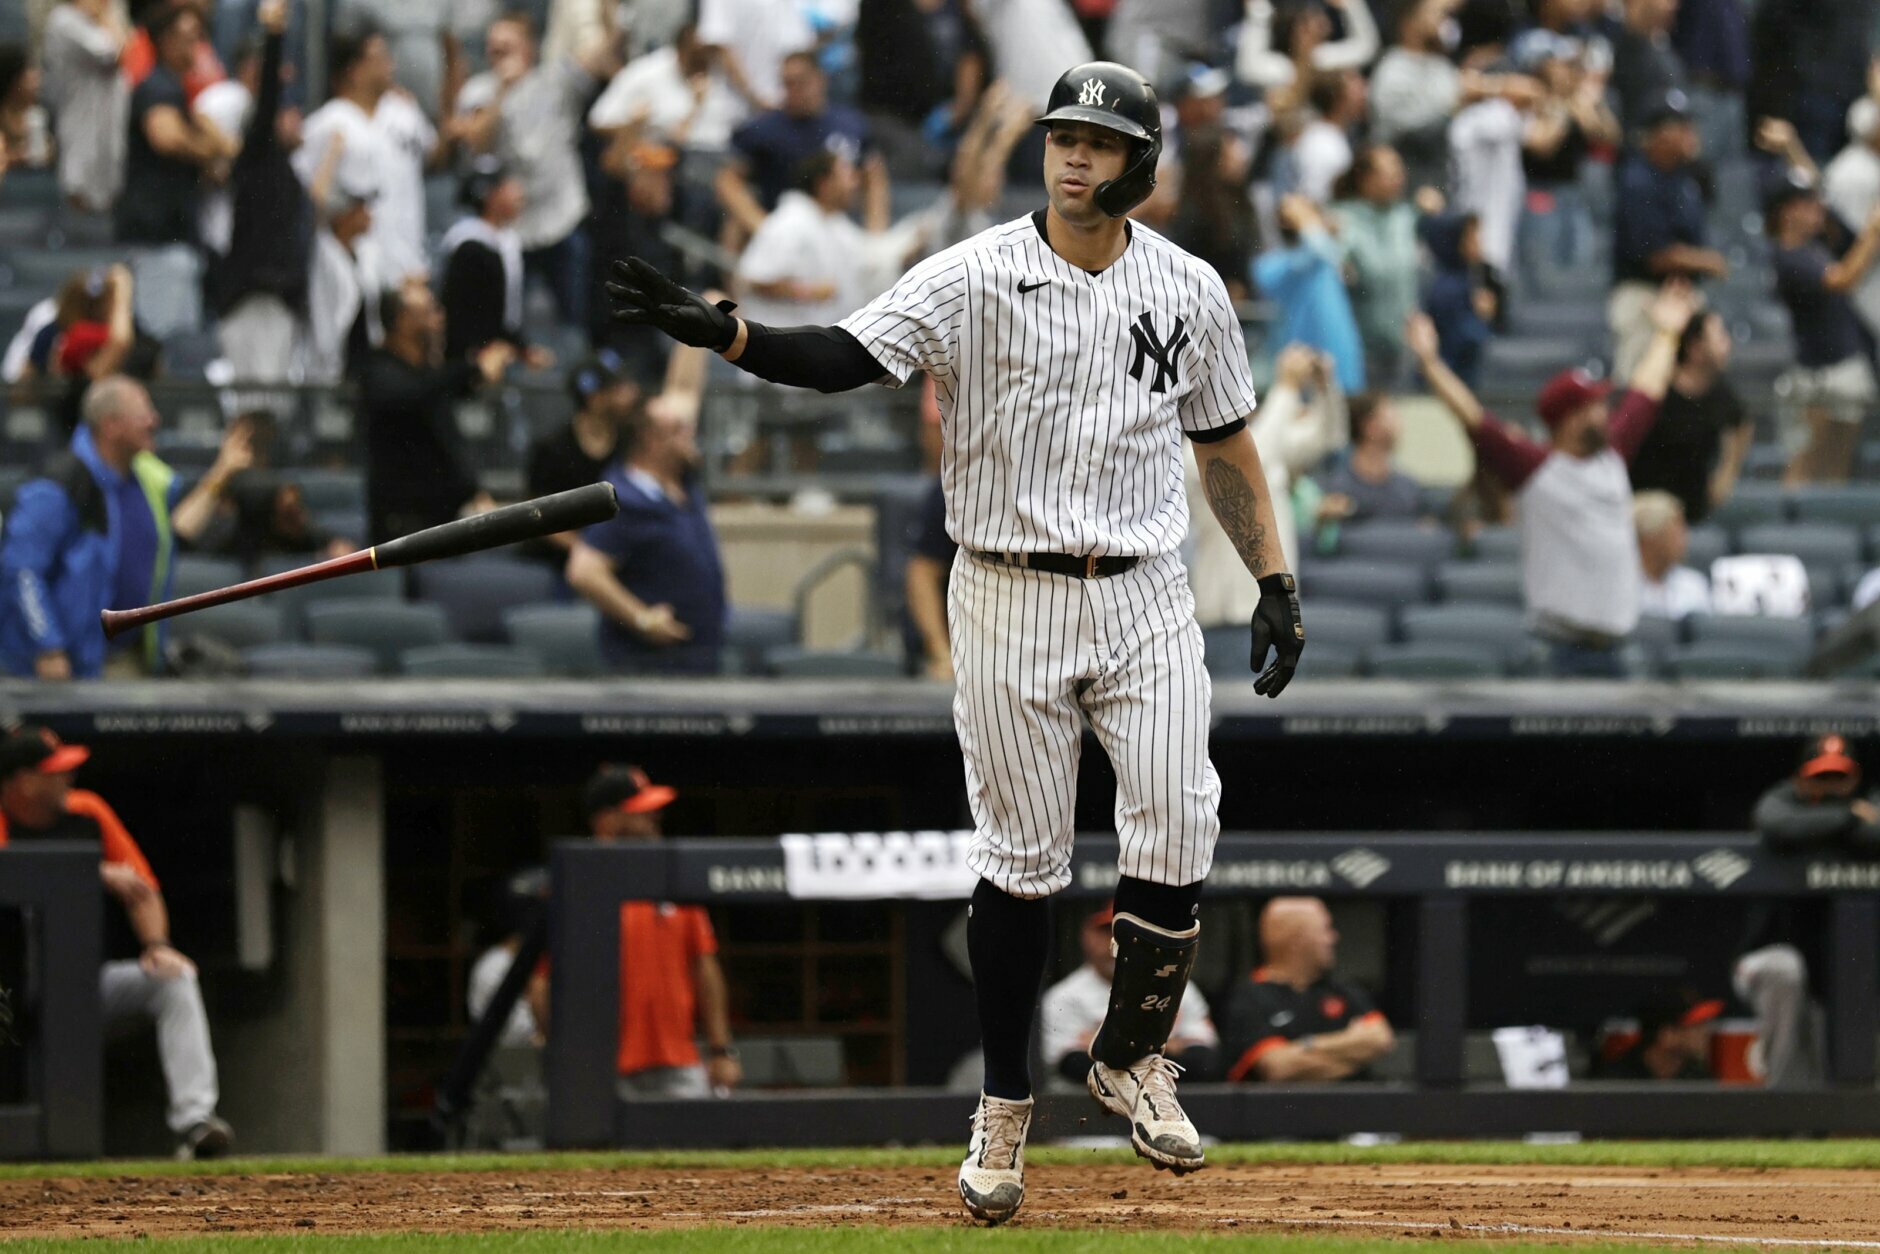 New York Yankees' Gary Sanchez throws his bat after hitting a grand slam against the Baltimore Orioles during the second inning of a baseball game on Sunday, Sept. 5, 2021, in New York. (AP Photo/Adam Hunger)